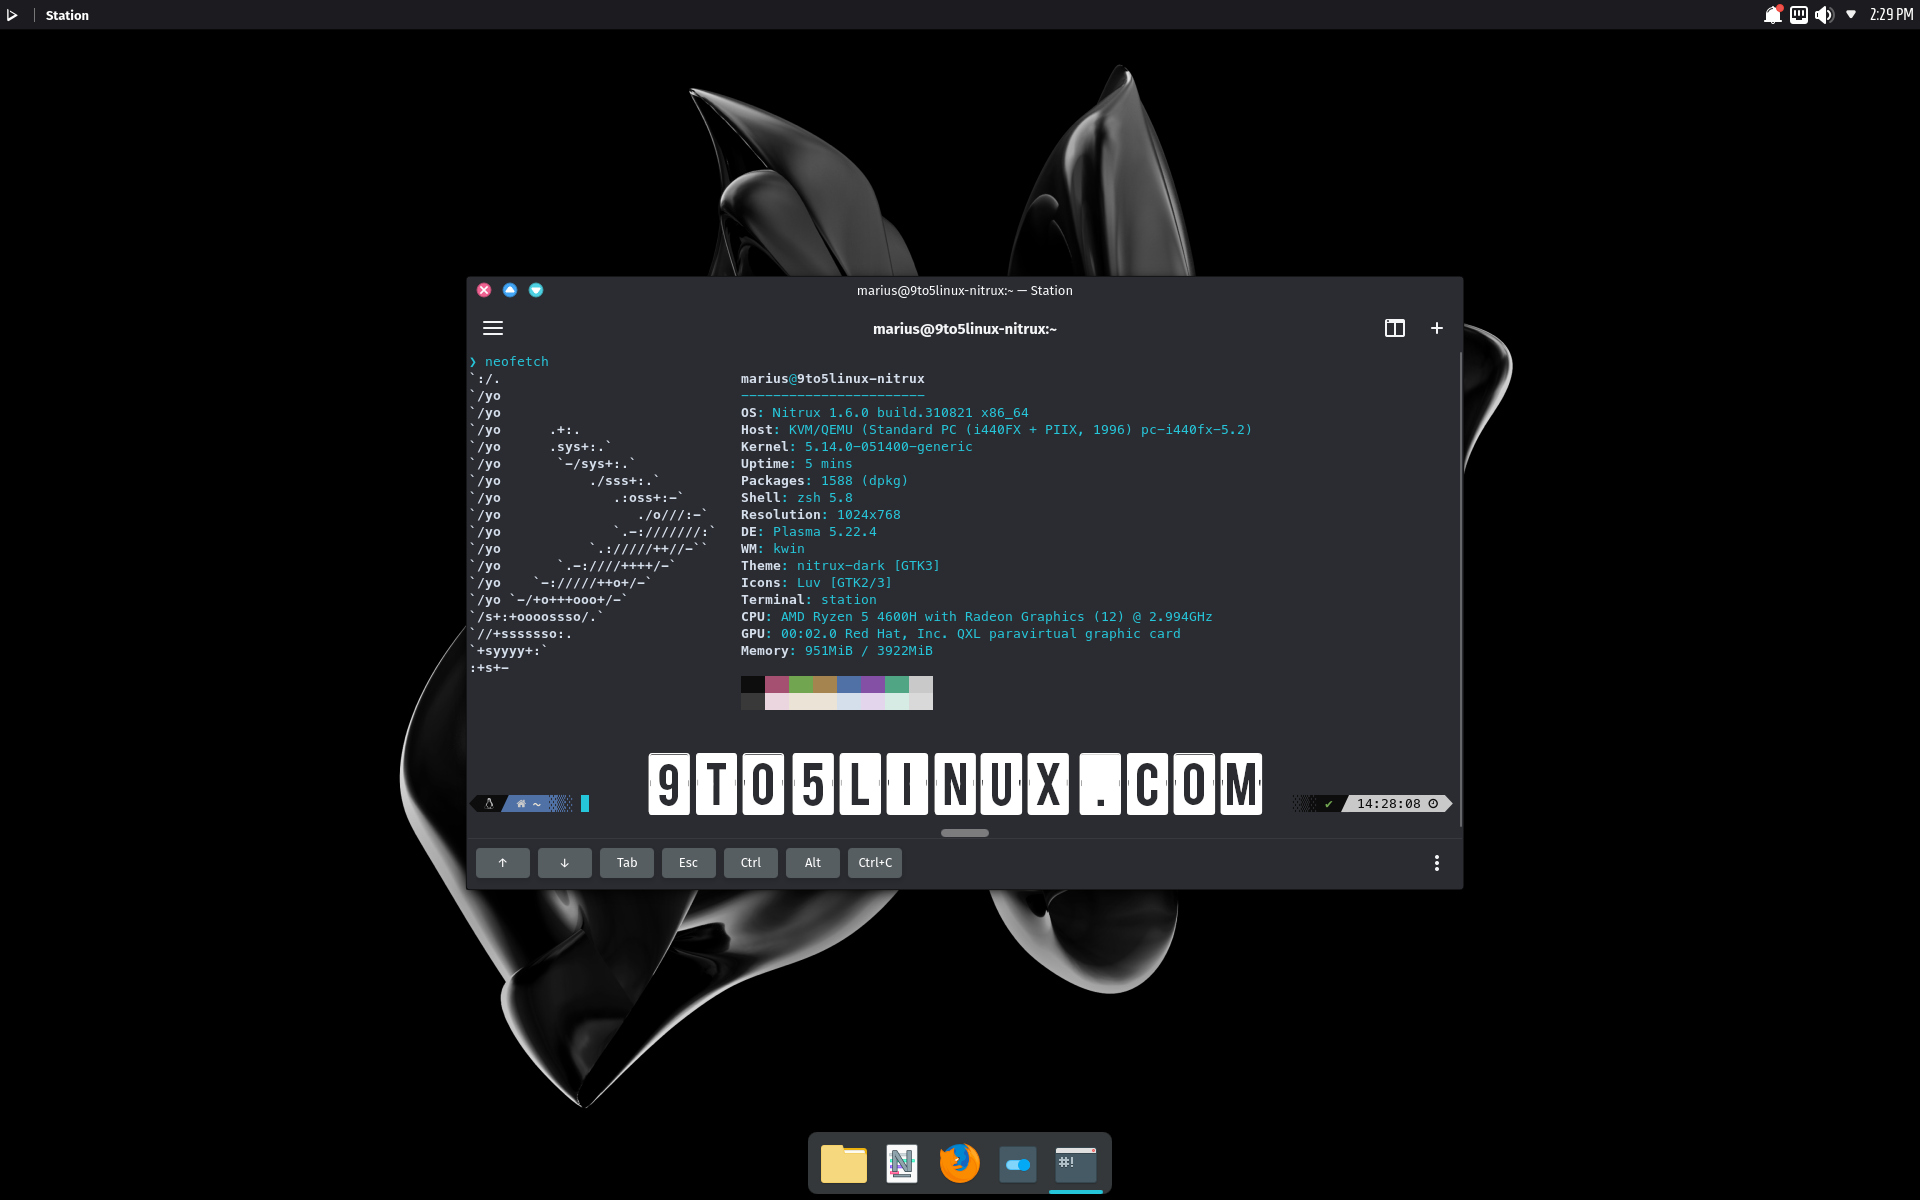 Nitrux 1.6 Is Here as One of the First Distros to Ship with Linux Kernel 5.14, Latest KDE Goodies